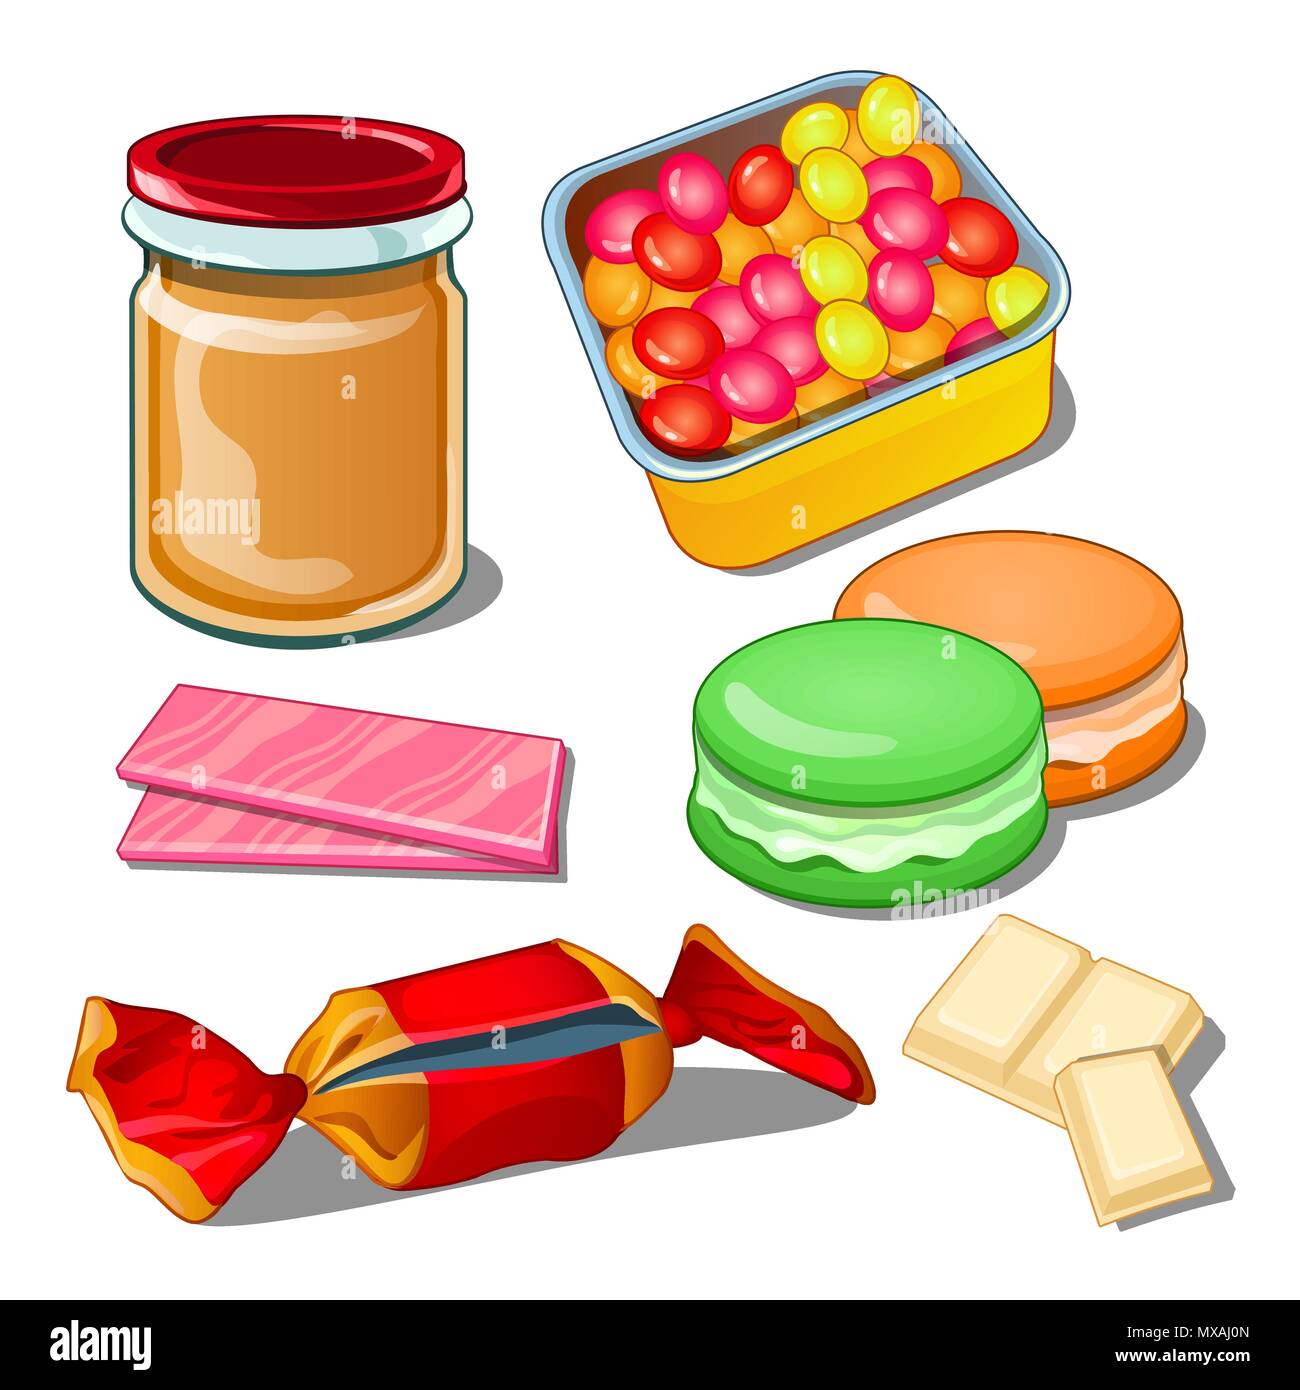 Sweet isolated on a white background. Colorful confections the best gift for the sweet tooth. Vector illustration. Stock Vector